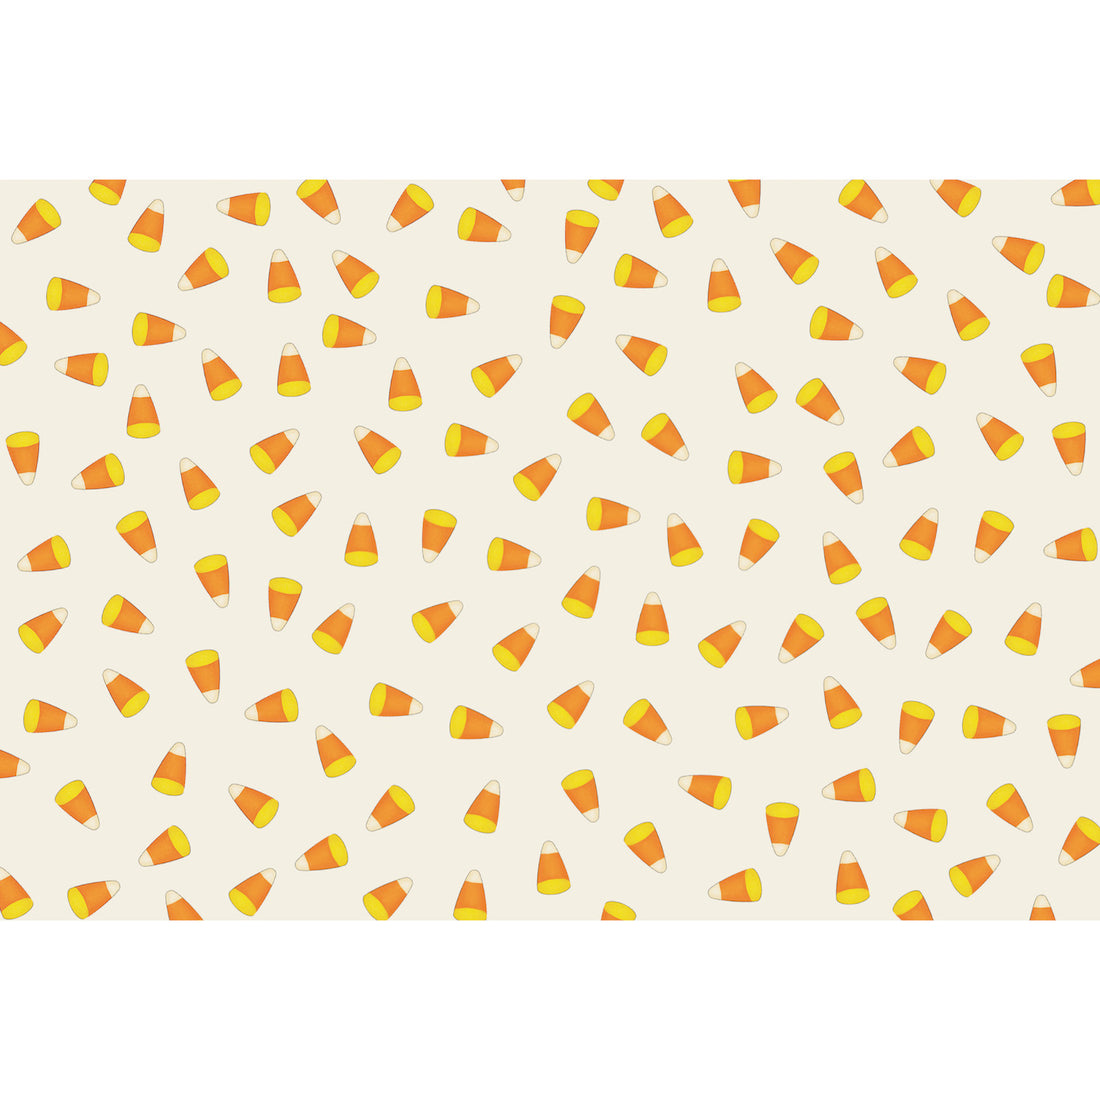 Illustrated  yellow, orange and white candy corns scattered on a cream background.